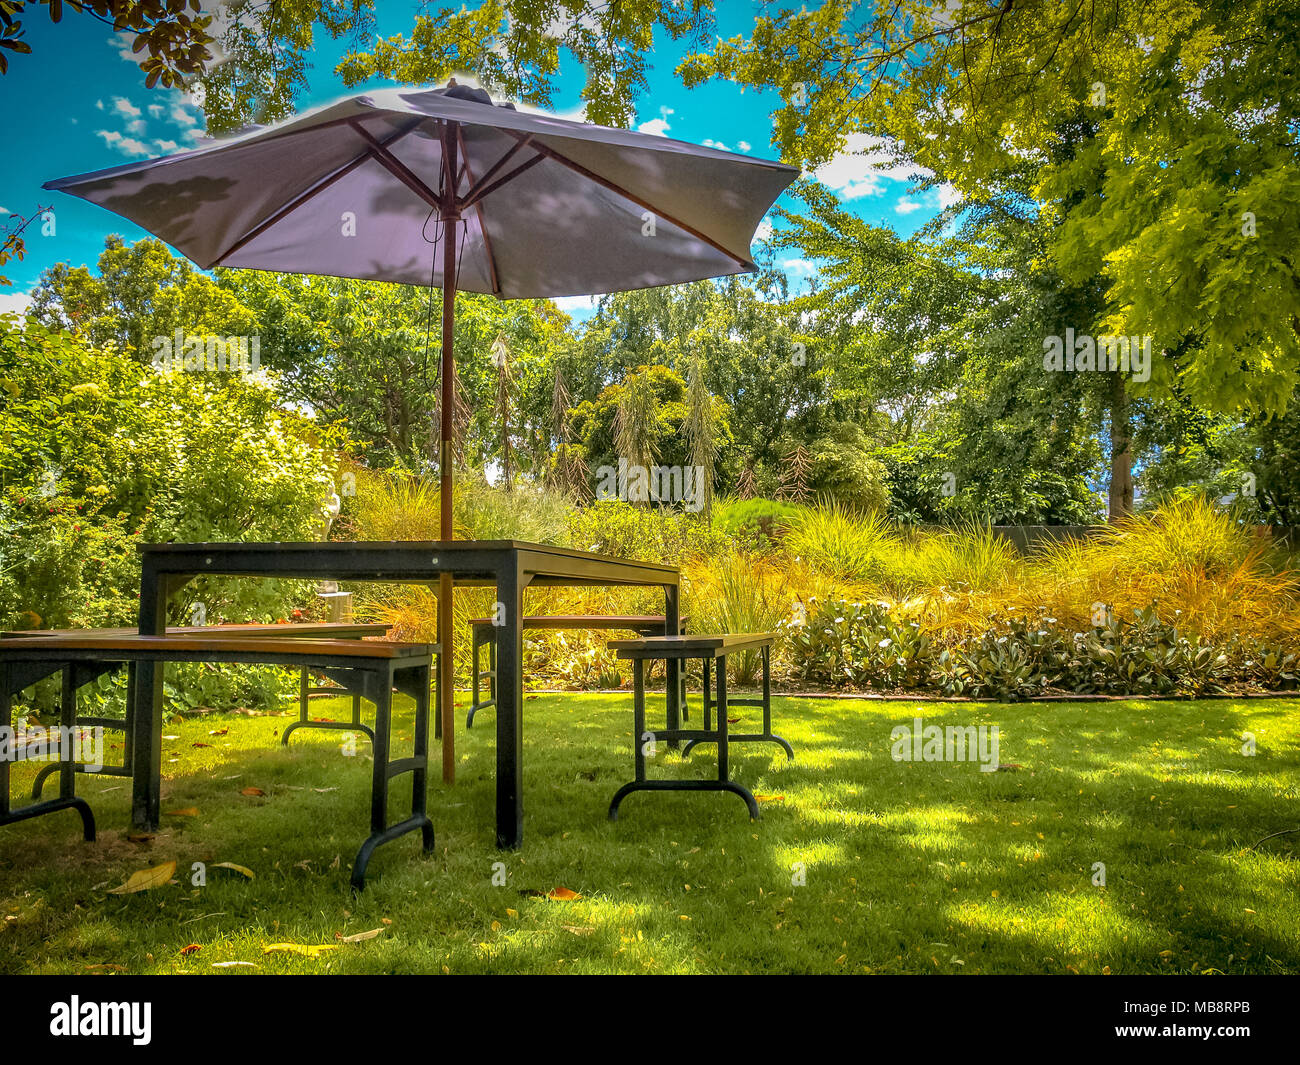 MARLBOROUGH, NEW ZEALAND - DECEMBER 6: Furniture Dining Table with Chairs and Parasol in the Shade in a Lush backyard Garden Stock Photo